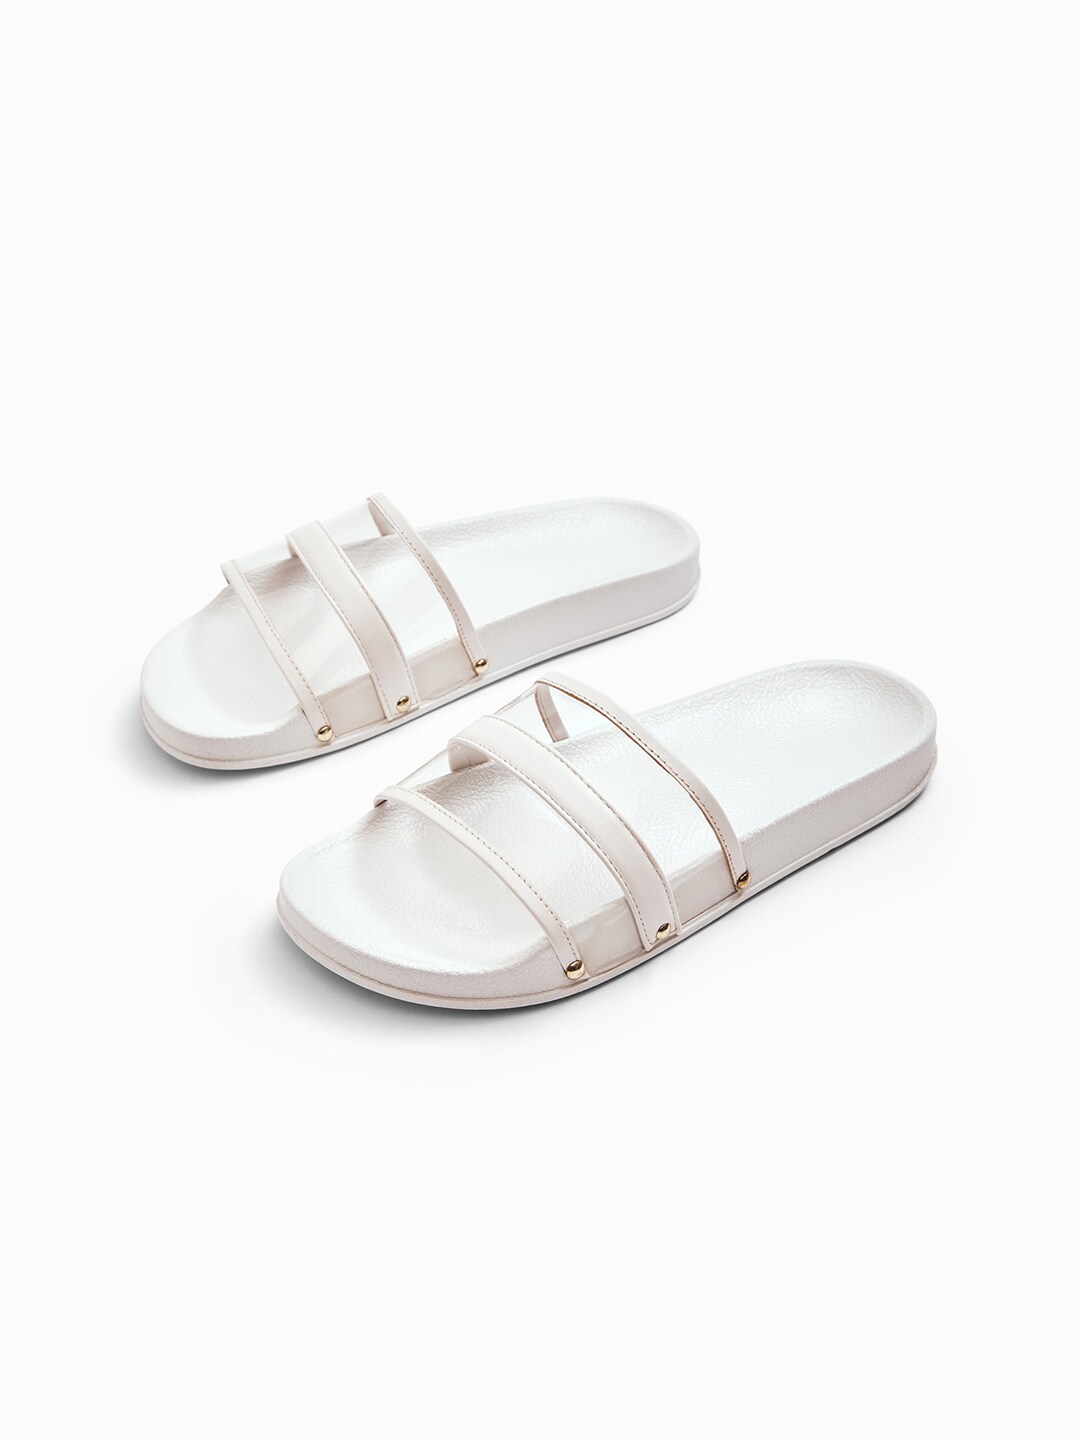 The Label Life Women's White Colourblocked Flats Price in India